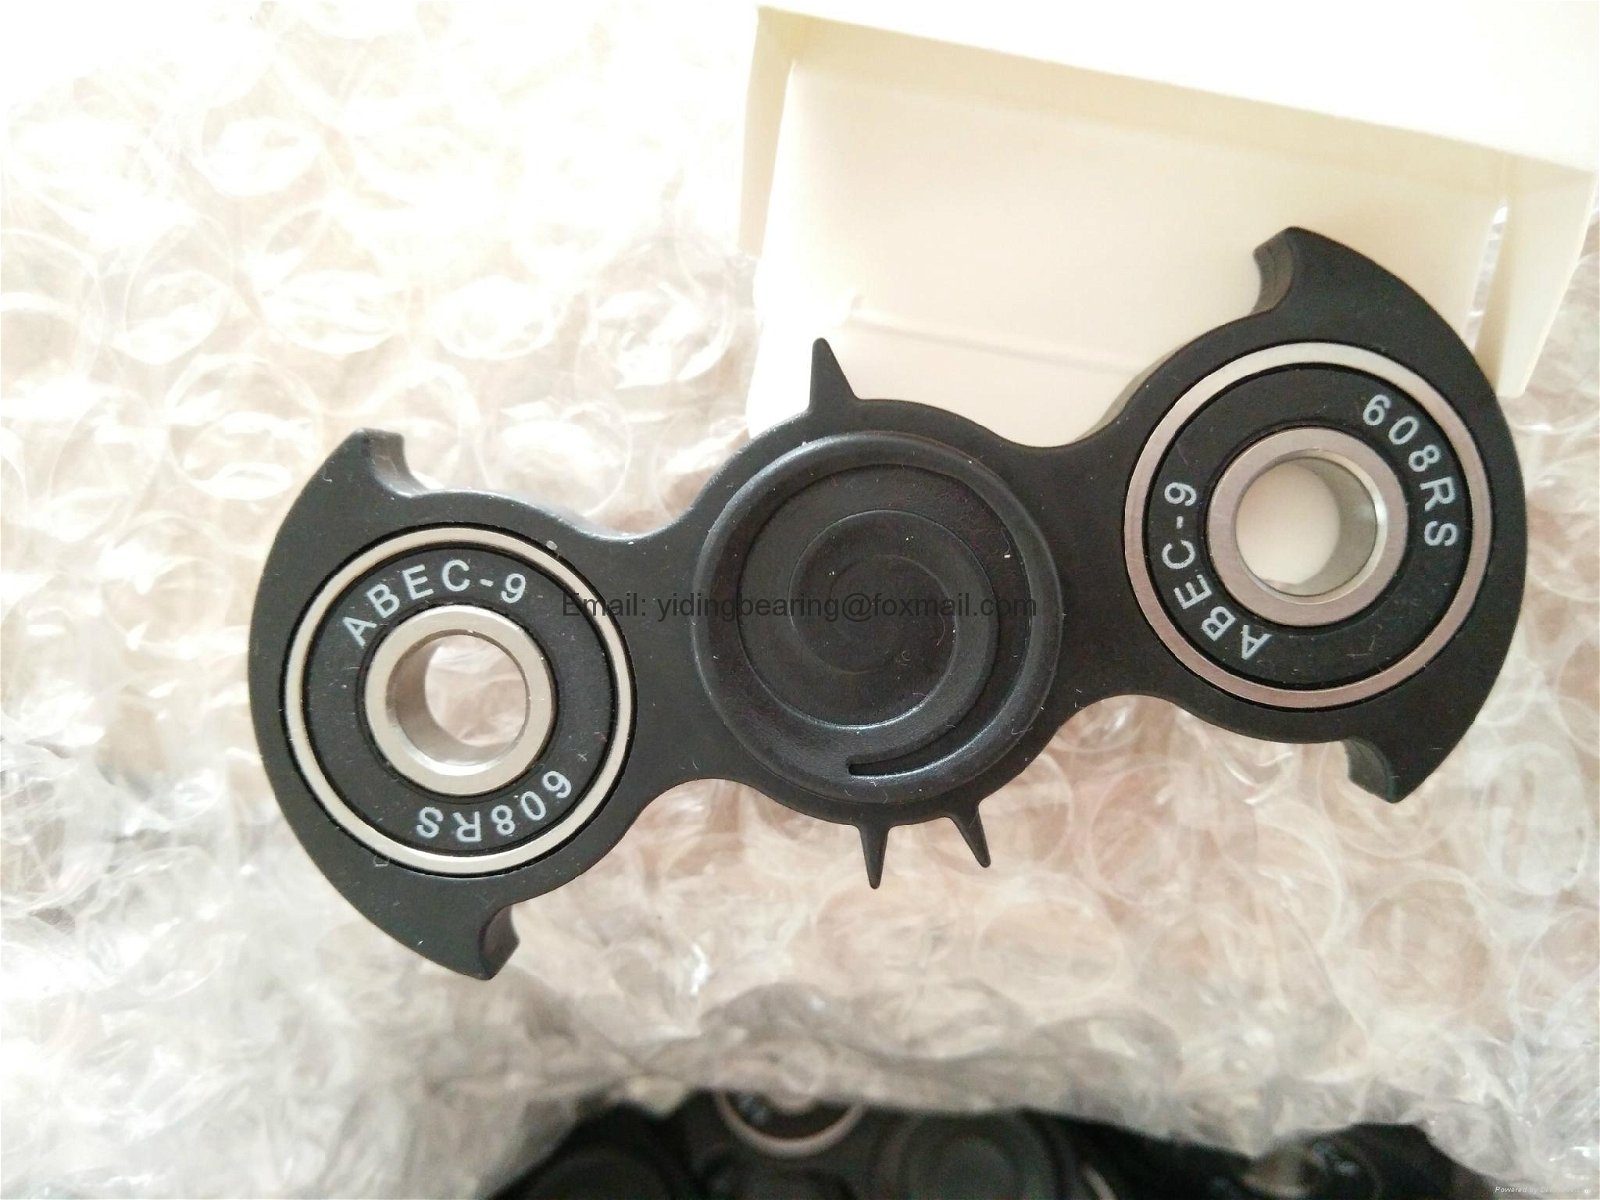 Batman hand spinner with 608 bearing 1